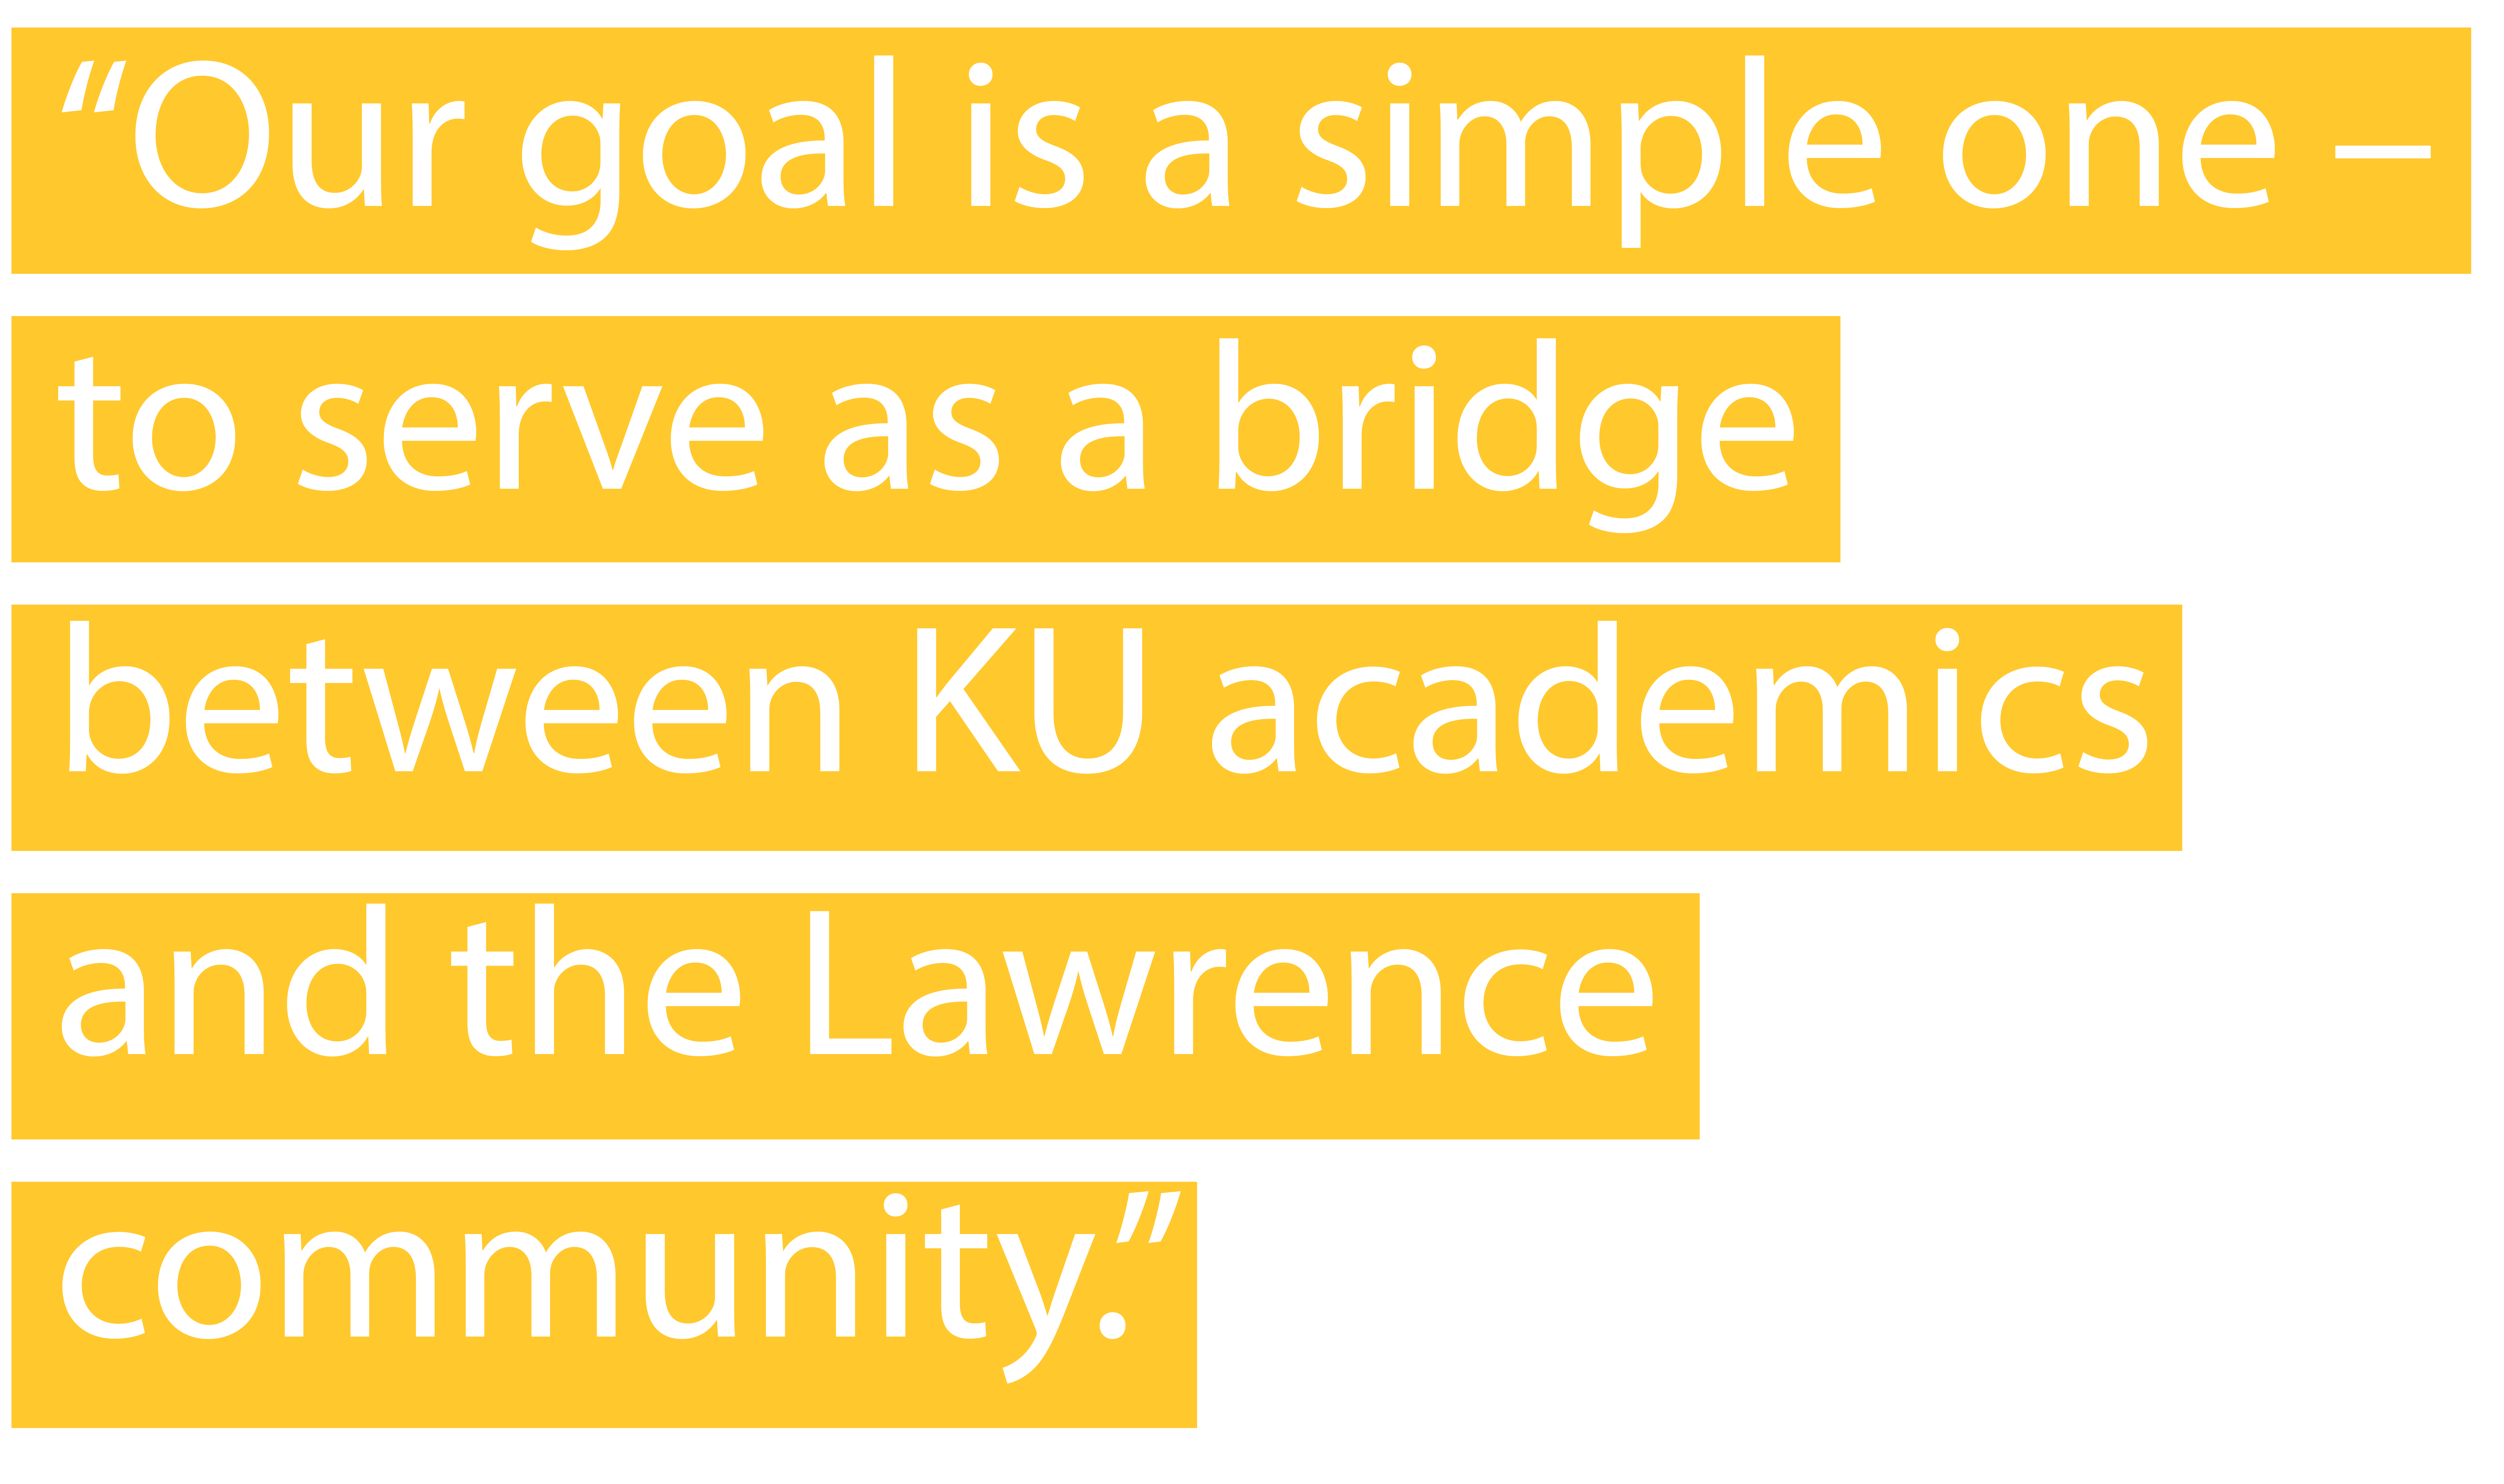 "Our goal is a simple one – to serve as a bridge between KU academics and the Lawrence community."